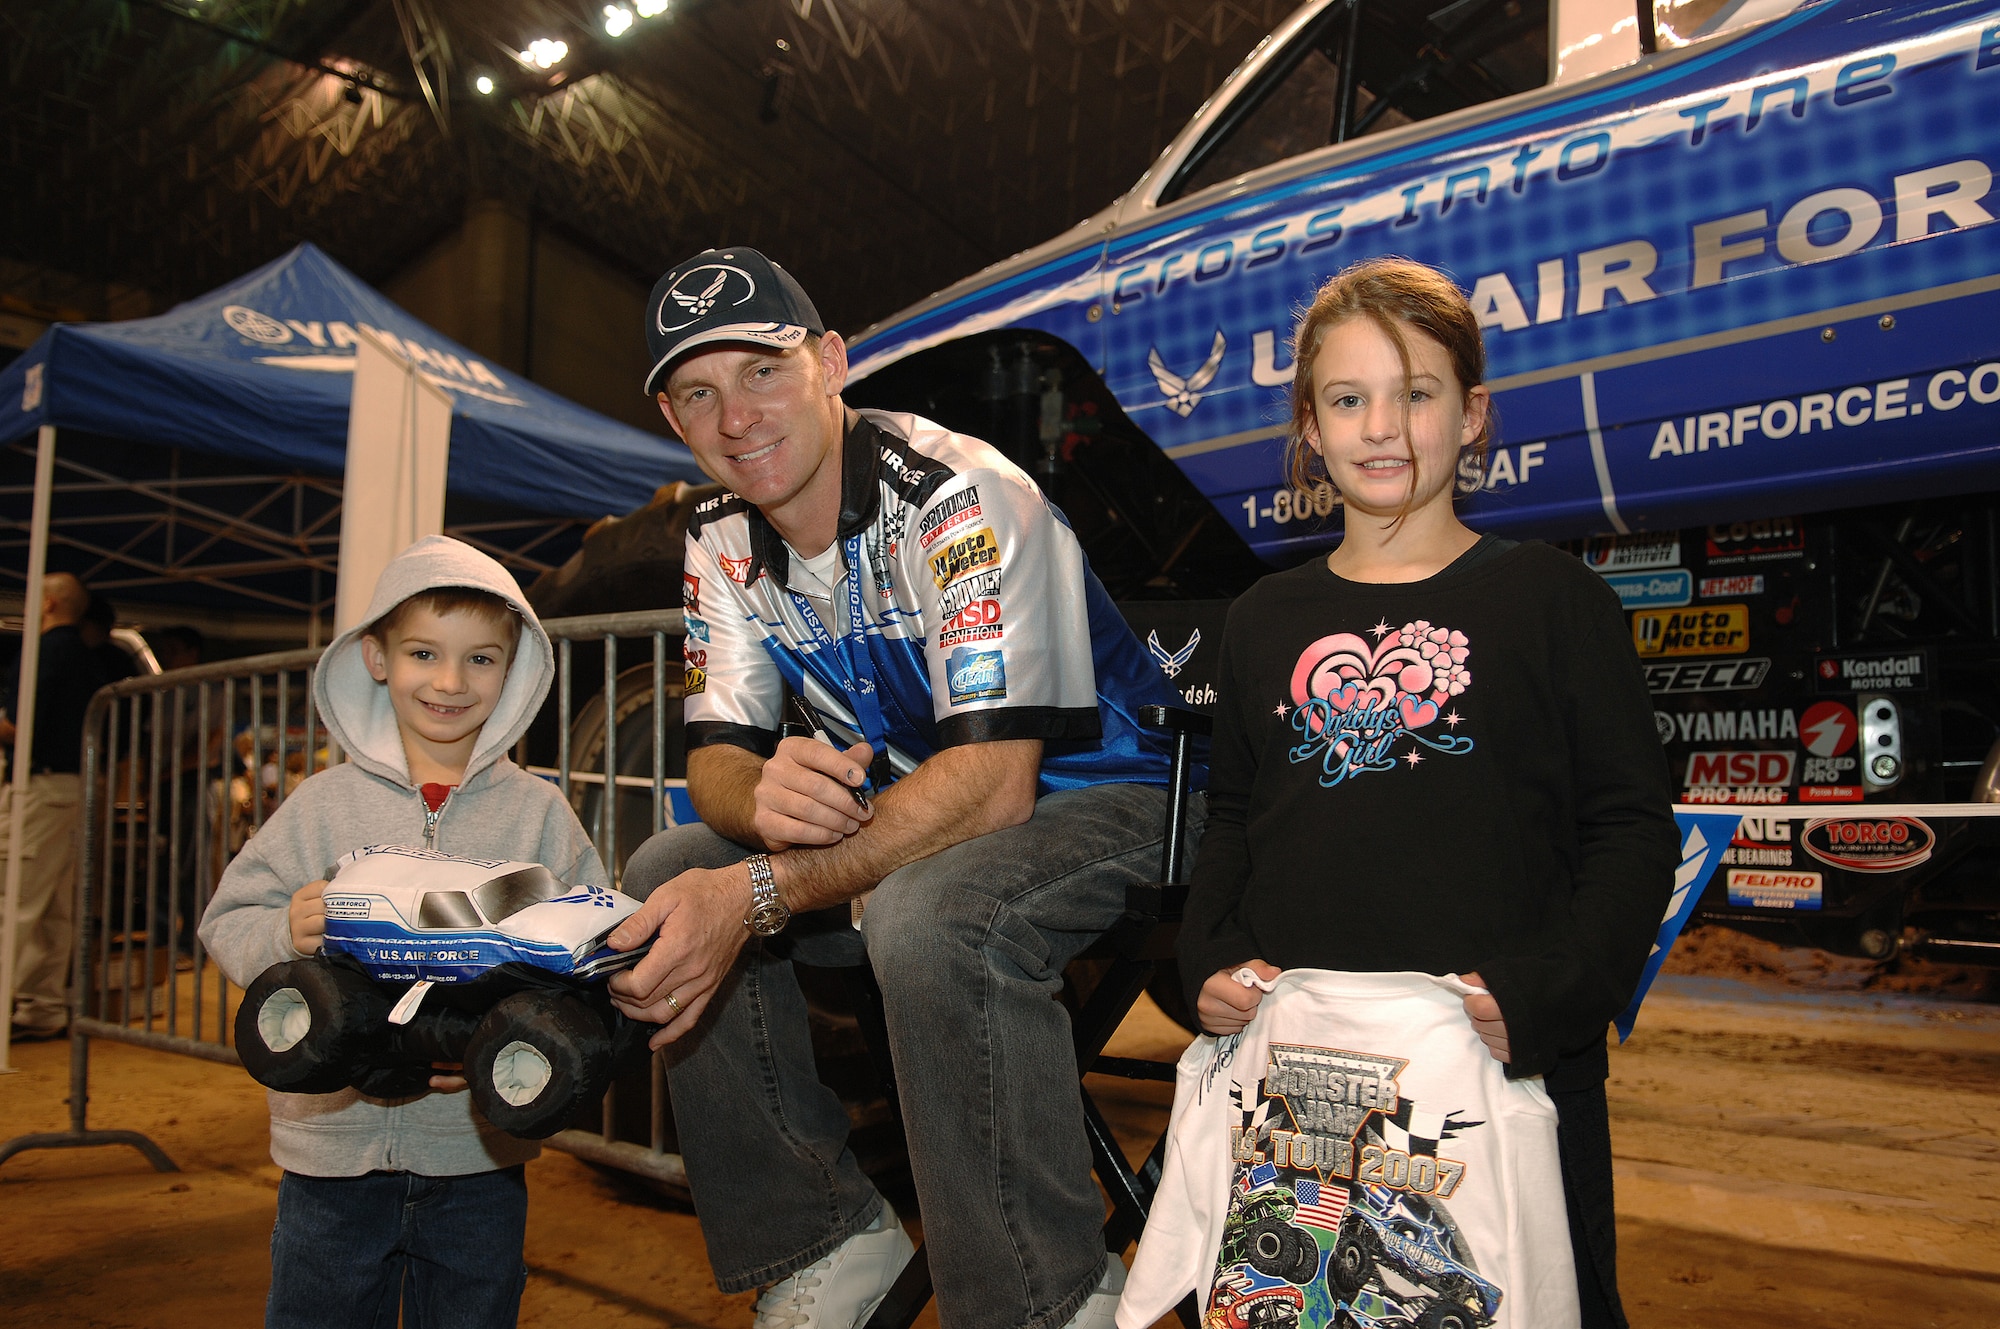 Damon Bradshaw, driver of the Air Force sponsored monster truck Afterburner, poses with young fans Ethan and Brooke during the Party in the Pits prior to the start of the 2007 Monster Jam in San Antonio, Texas, January 13, 2007. Ethan and Brooke are the children of Tech. Sgt. Bryce VanDevender, 37th Security Forces Squadron, Lackland AFB, TX. (US Air Force photo/Master Sgt. Scott Reed)